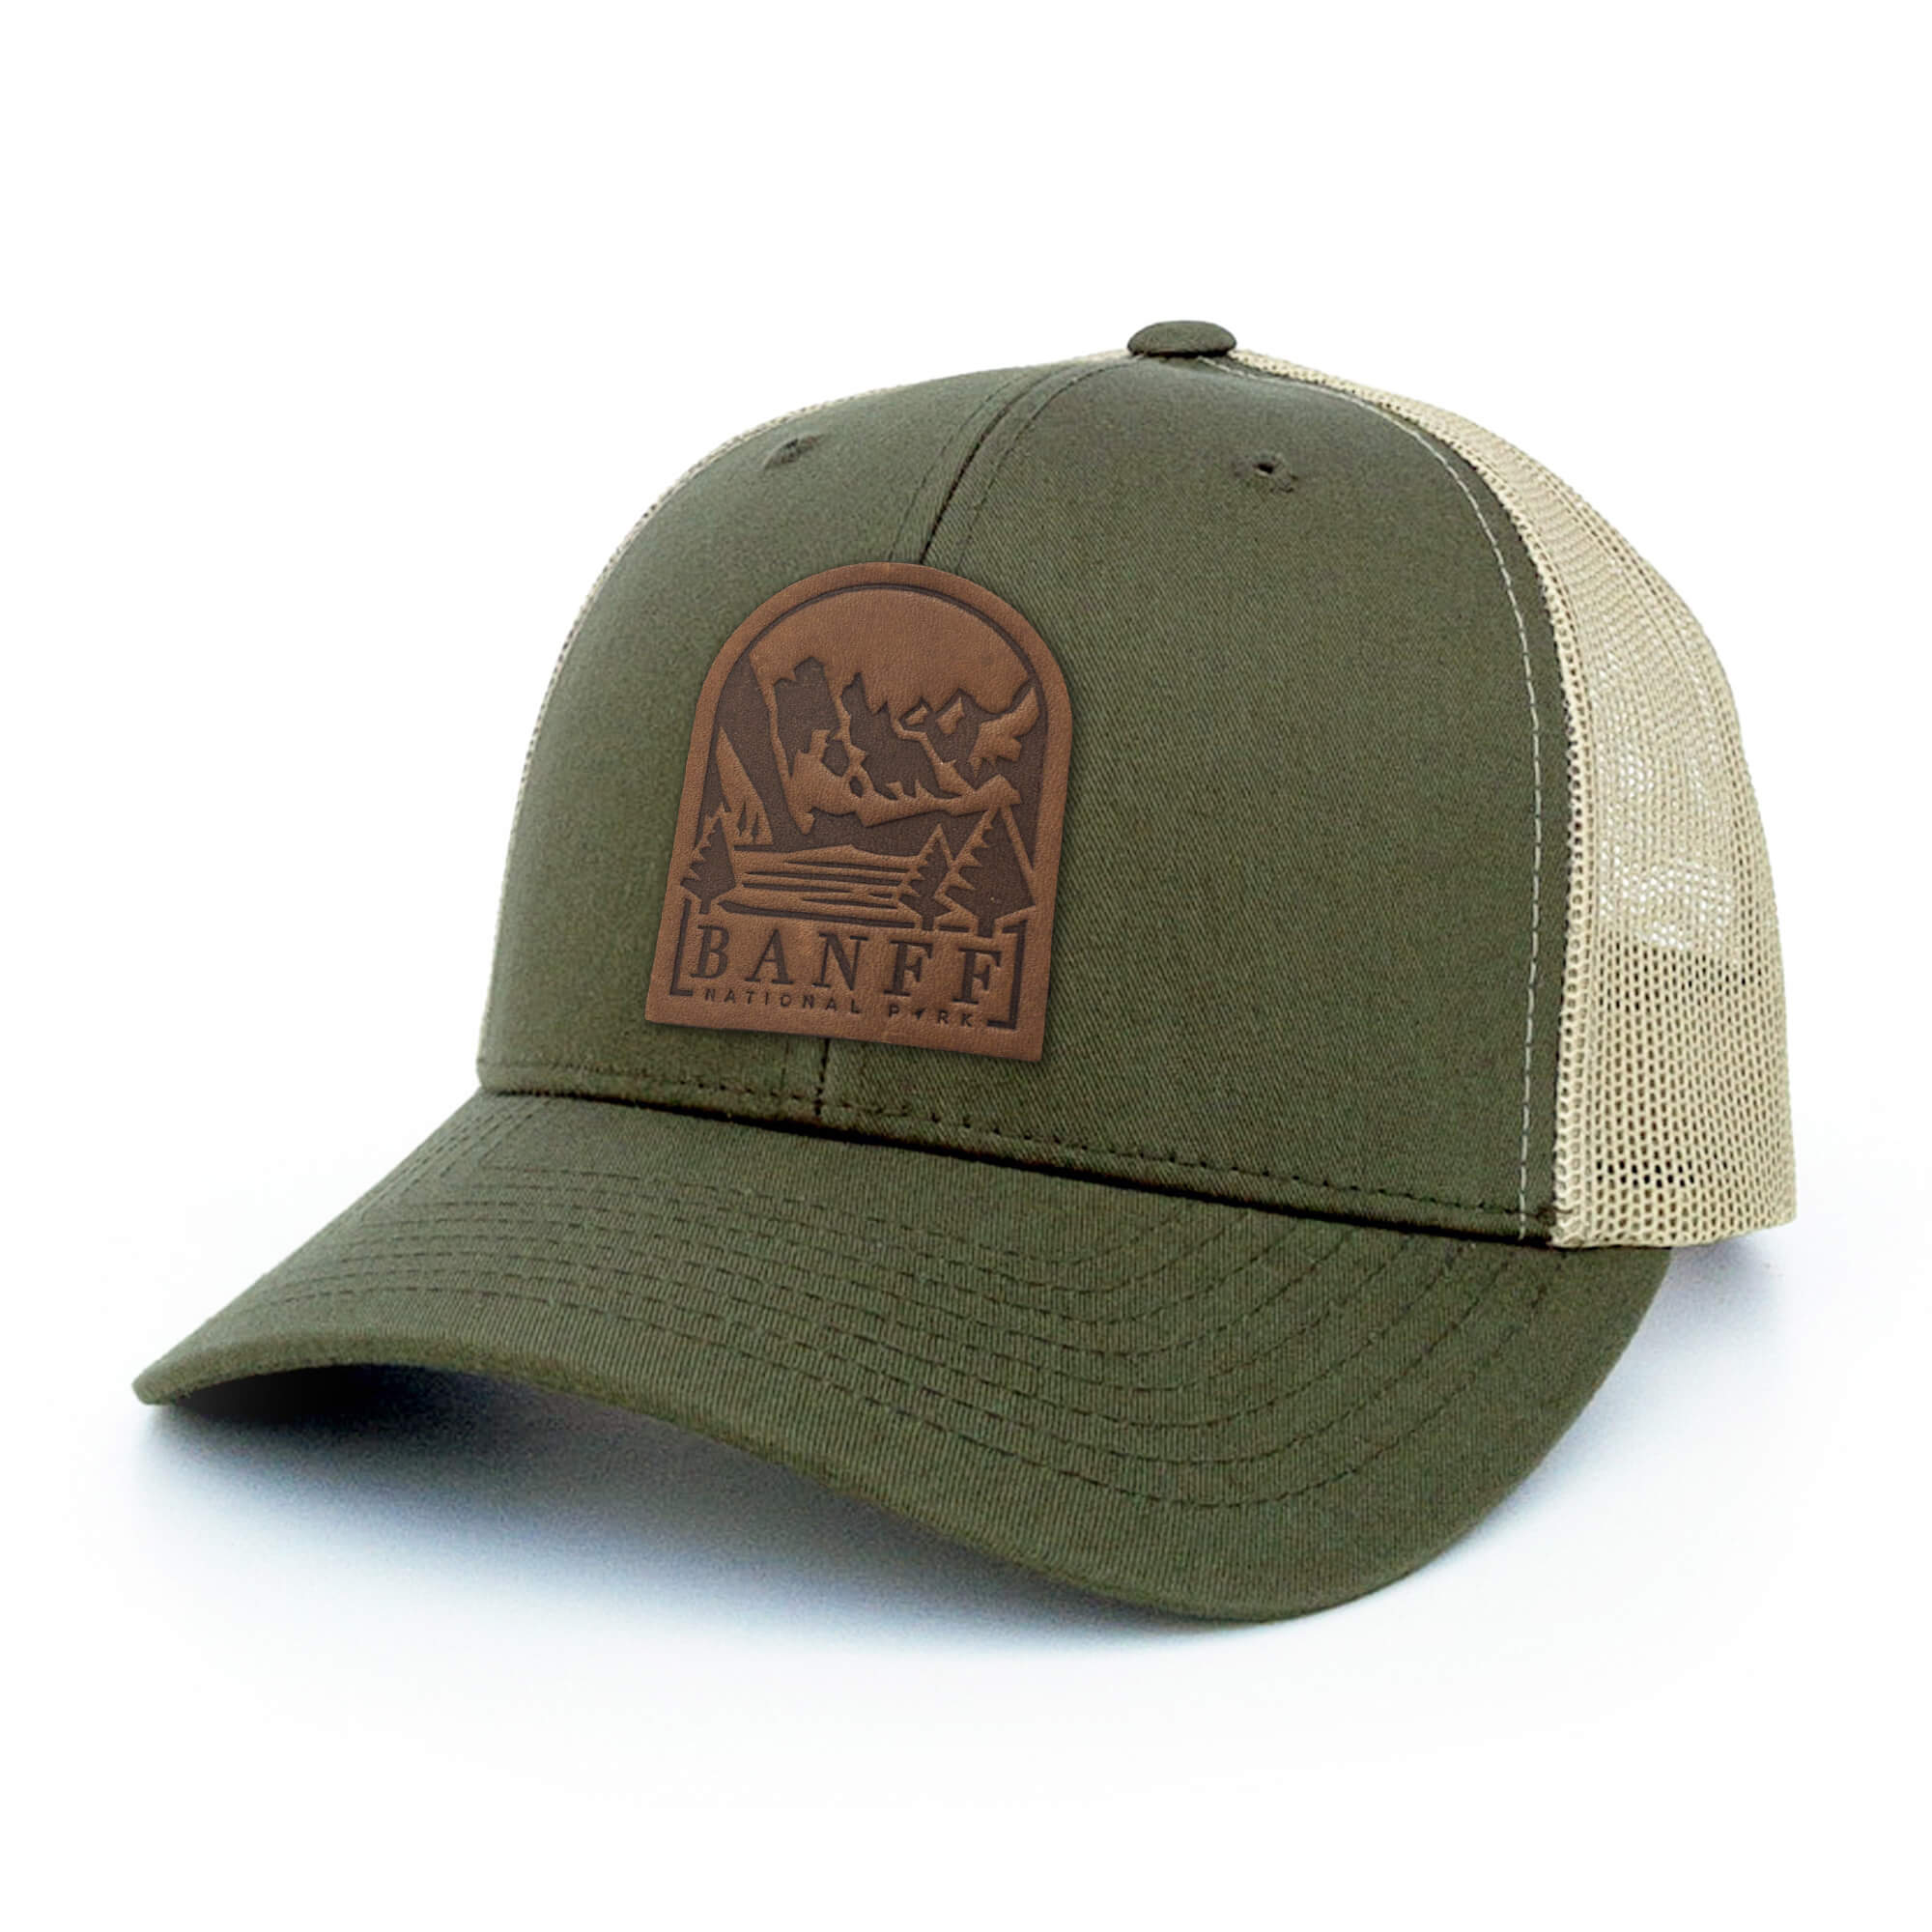 Moss green and khaki trucker hat with full-grain leather patch of Banff National Park | BLACK-007-001, CHARC-007-001, NAVY-007-001, HGREY-007-001, MOSS-007-001, BROWN-007-001